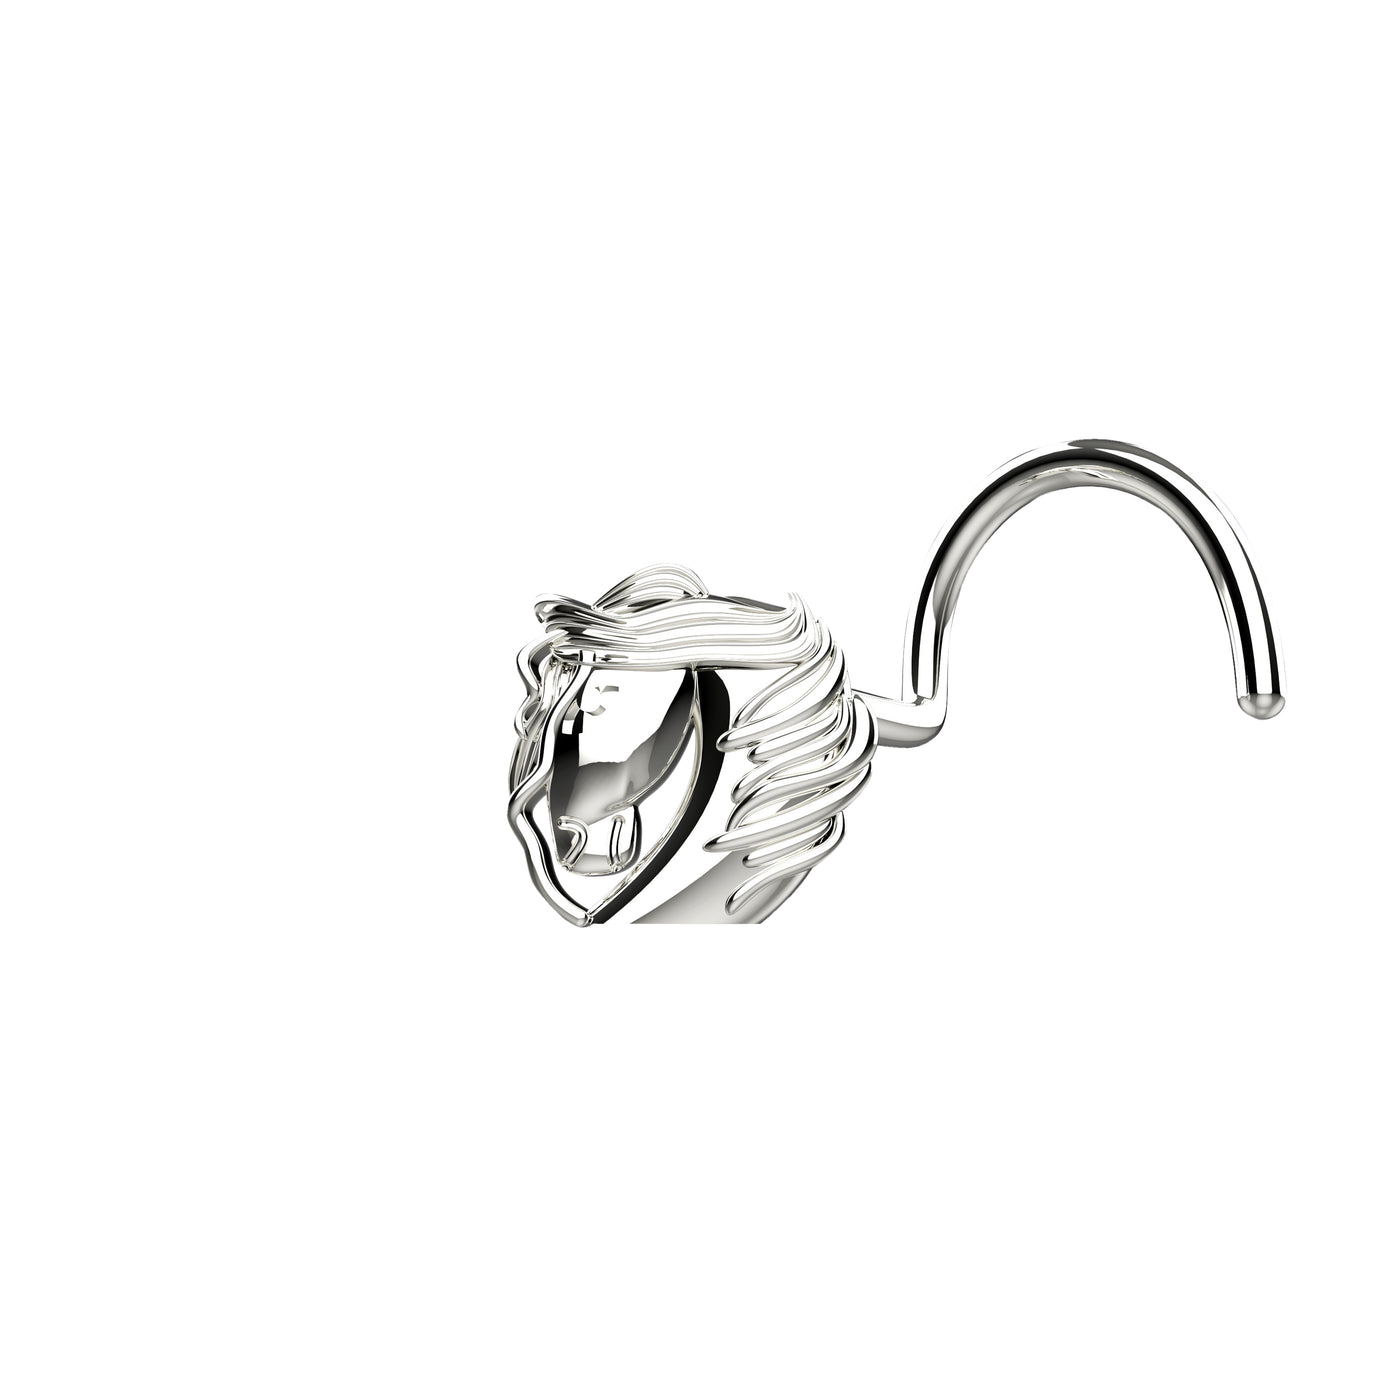 Delicate silver nose ring